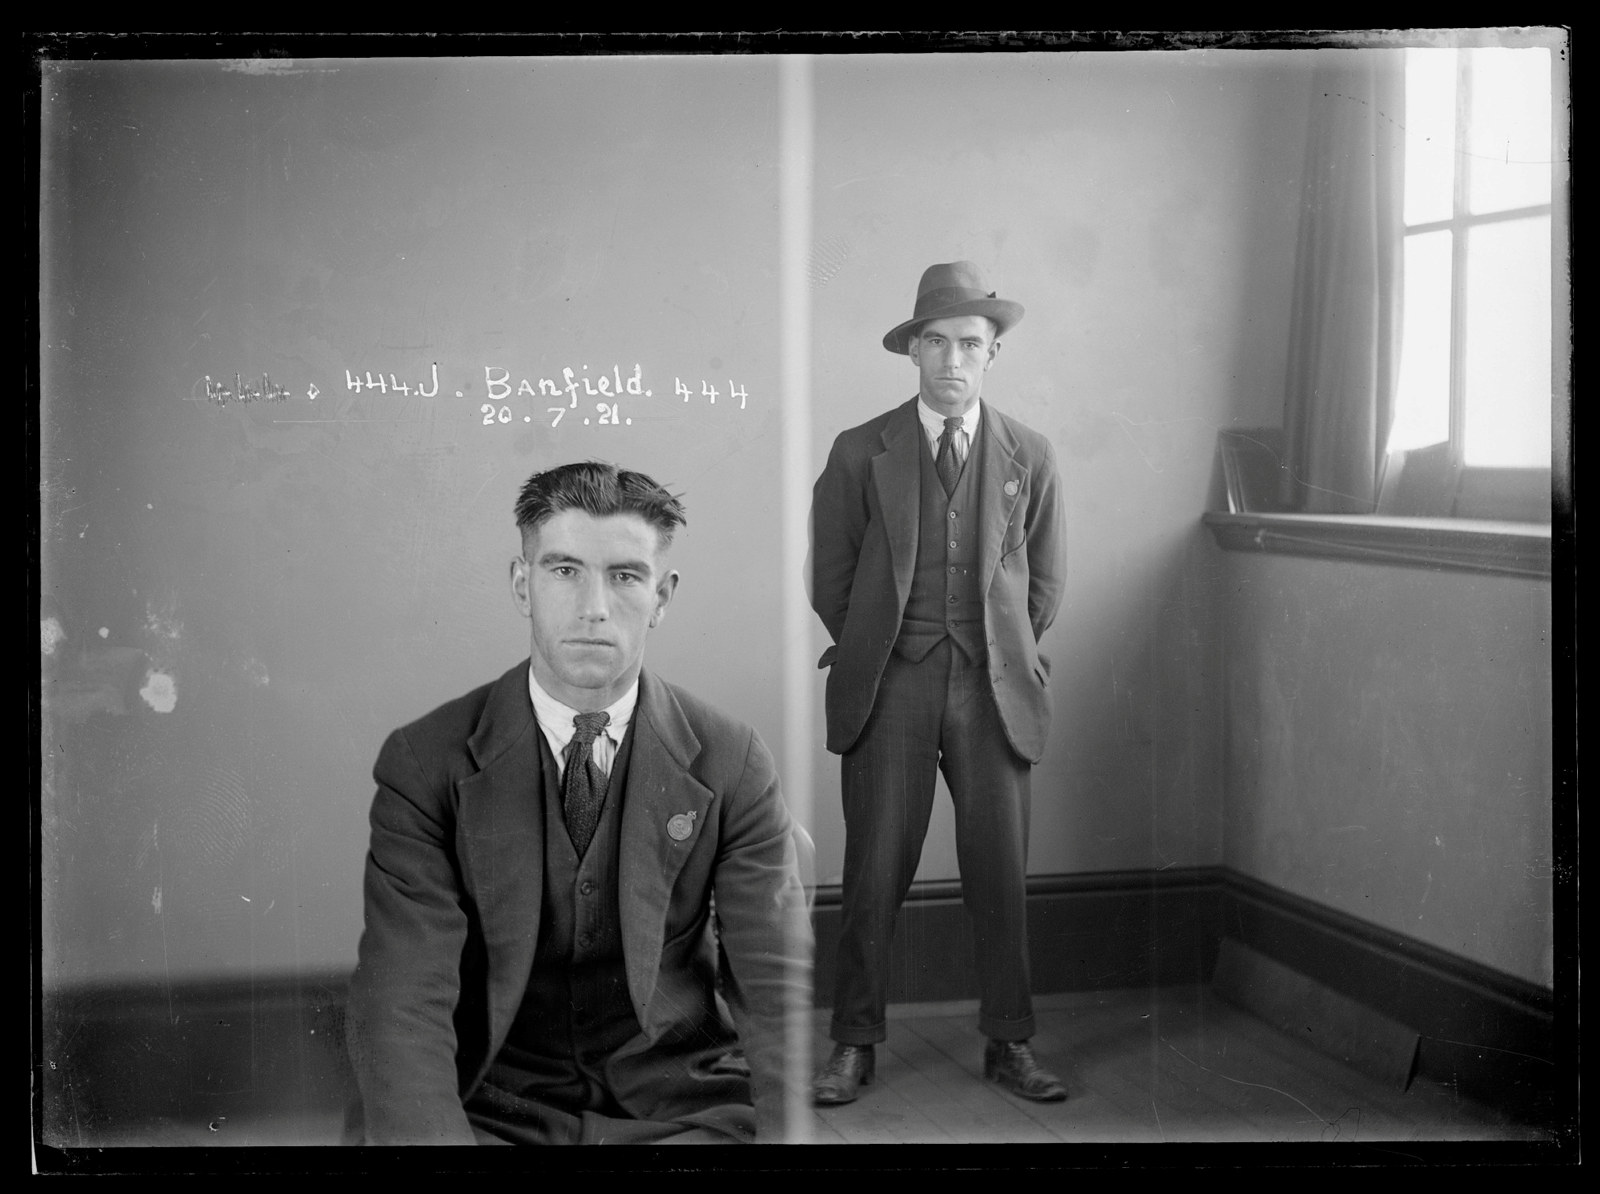 Two photos side by side, first showing seated man, second showing man standing, with hat on.